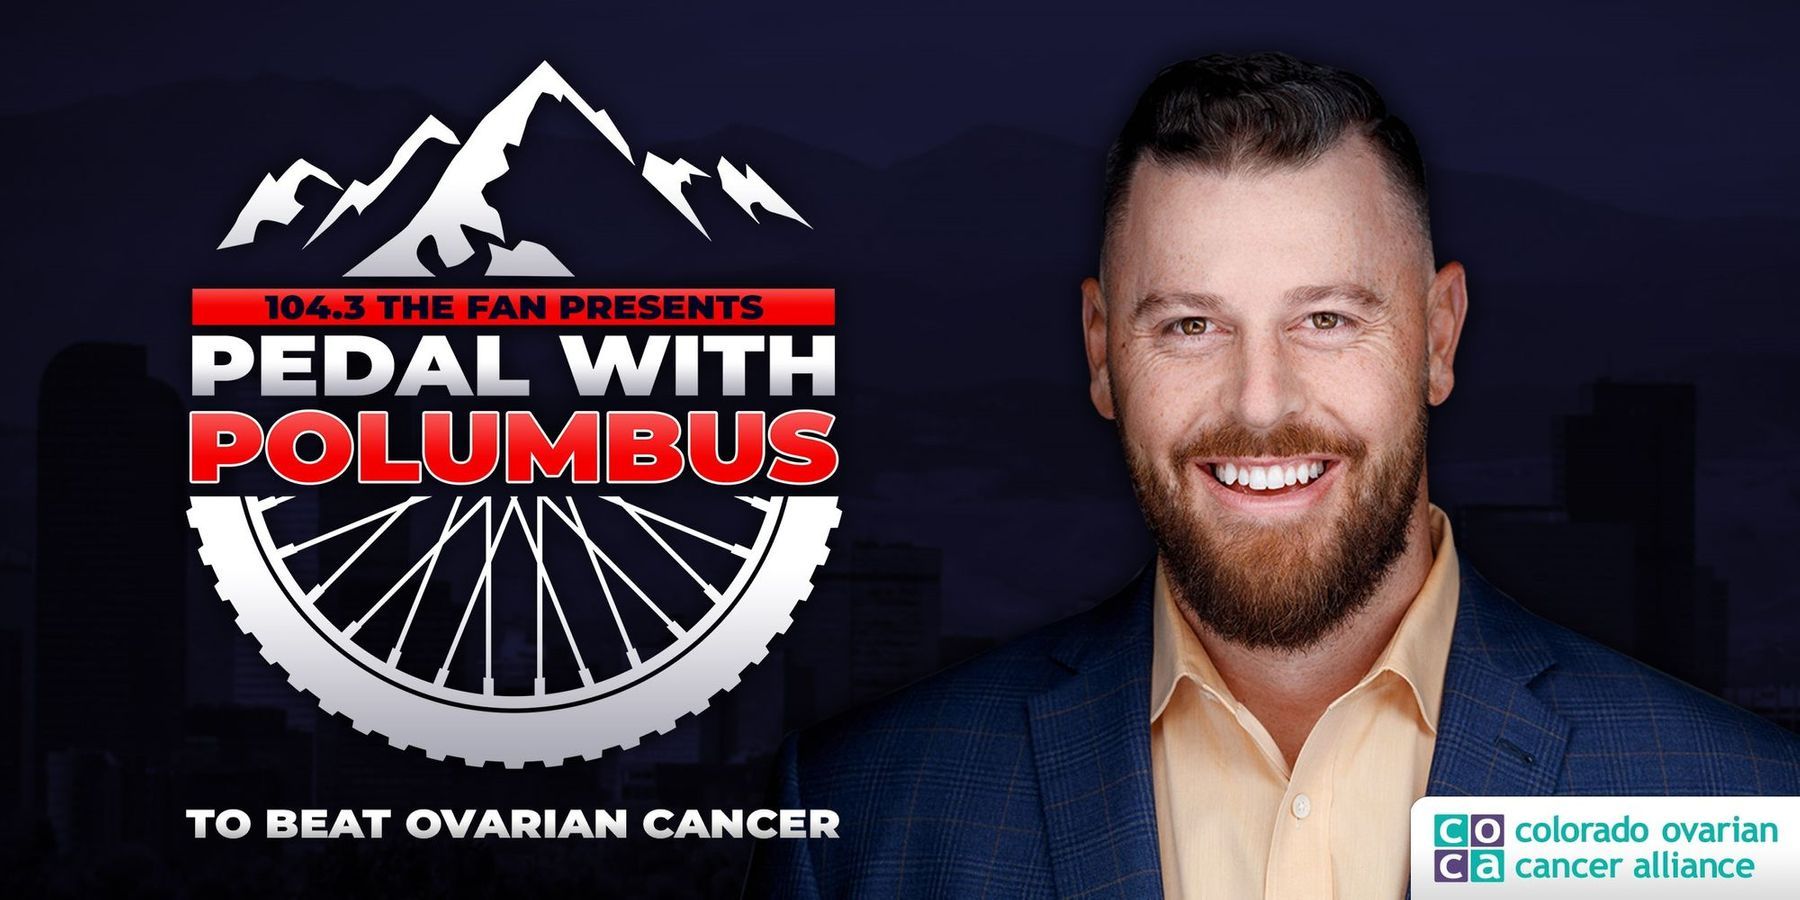 Pedal with Polumbus to BEAT Ovarian Cancer